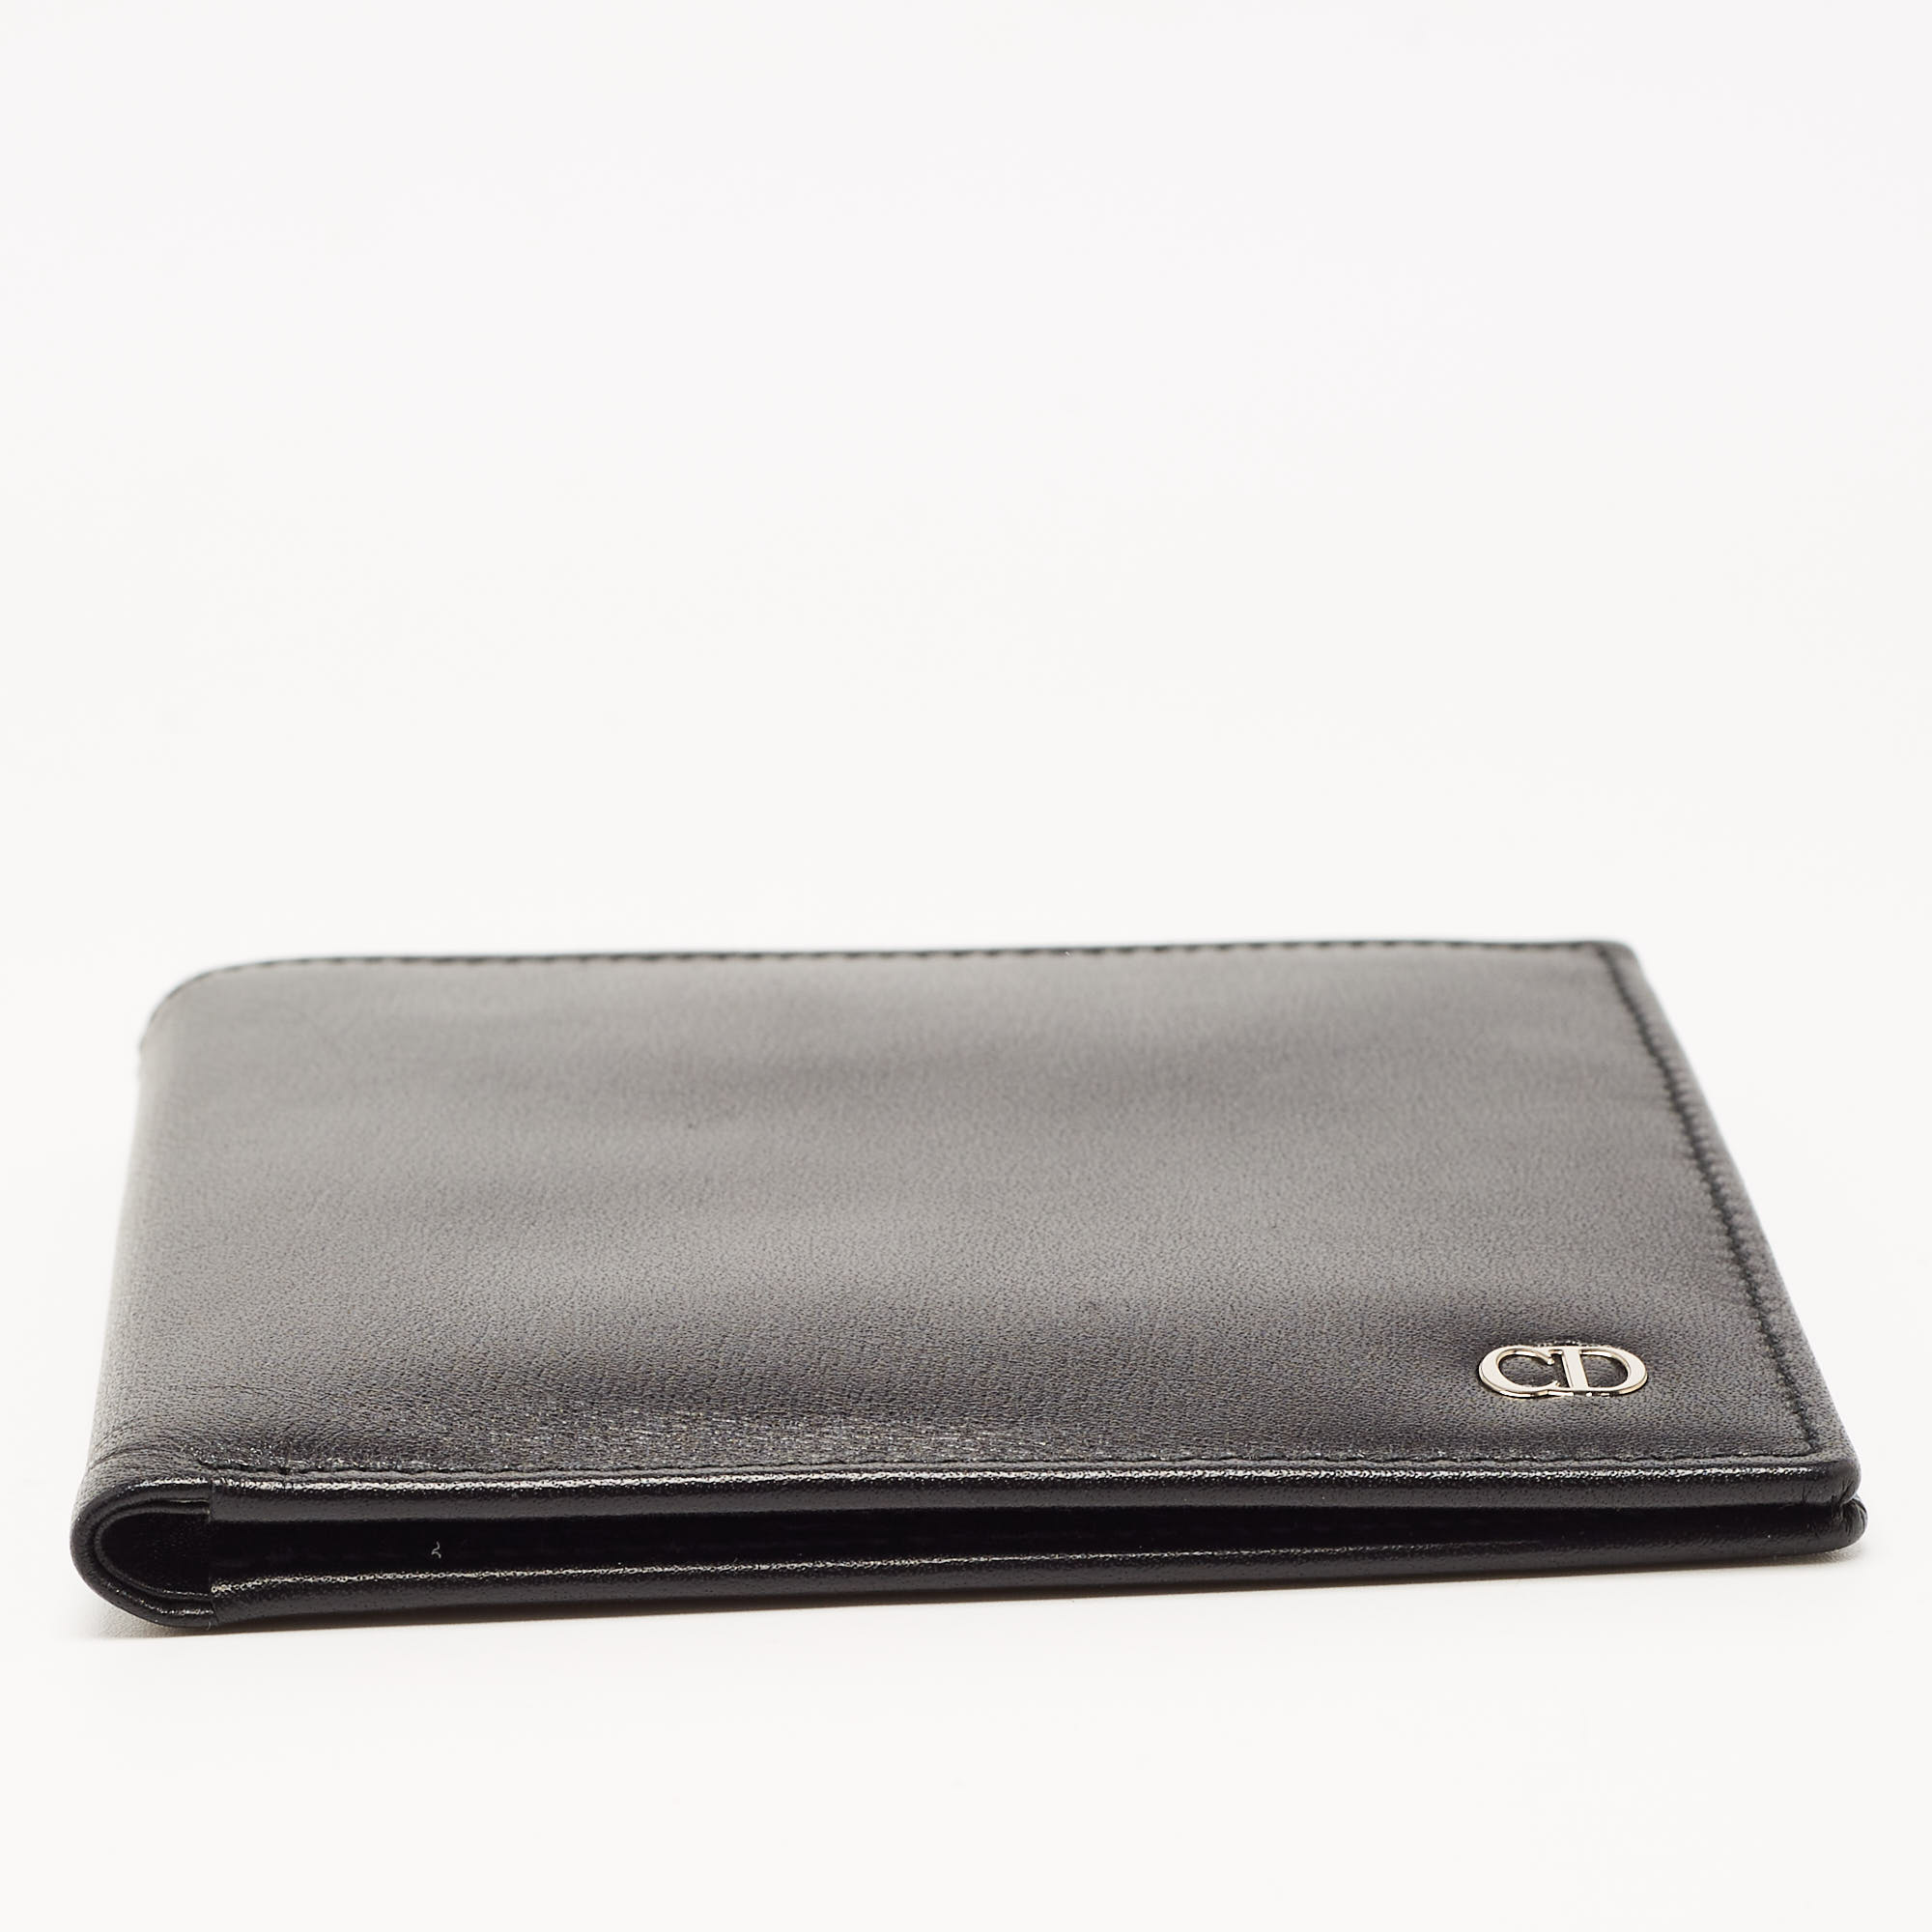 Dior Black Leather CD Icon Bifold Wallet